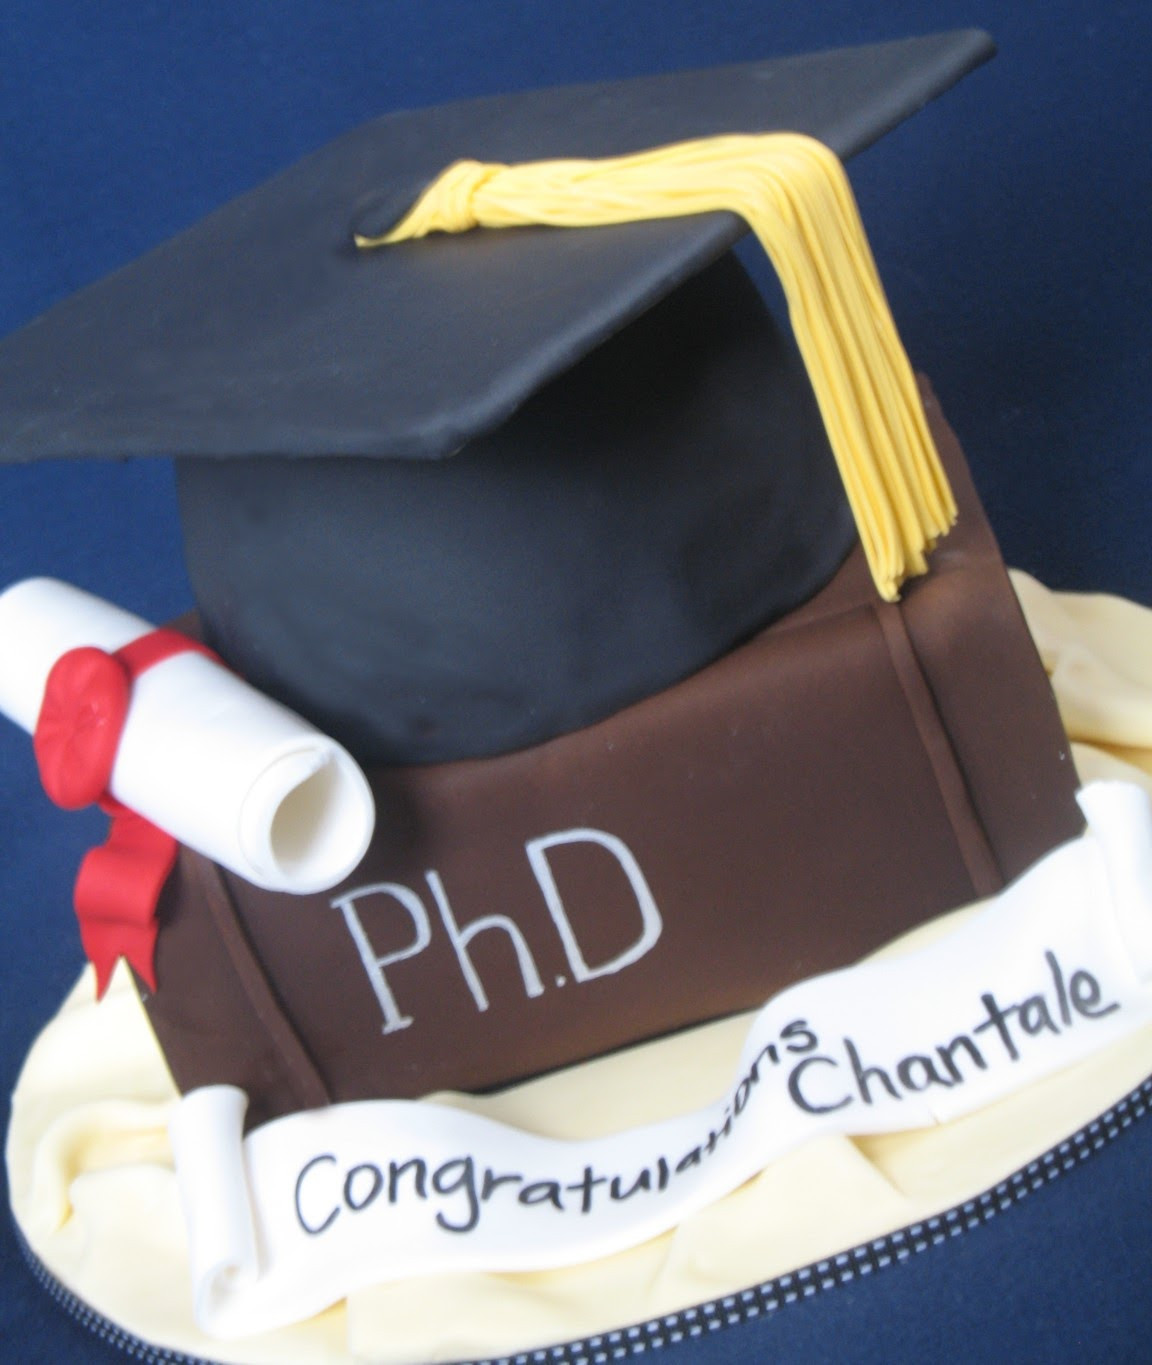 Doctoral Graduation Party Ideas
 Blissfully Sweet A Graduation Cake fit for a PhD